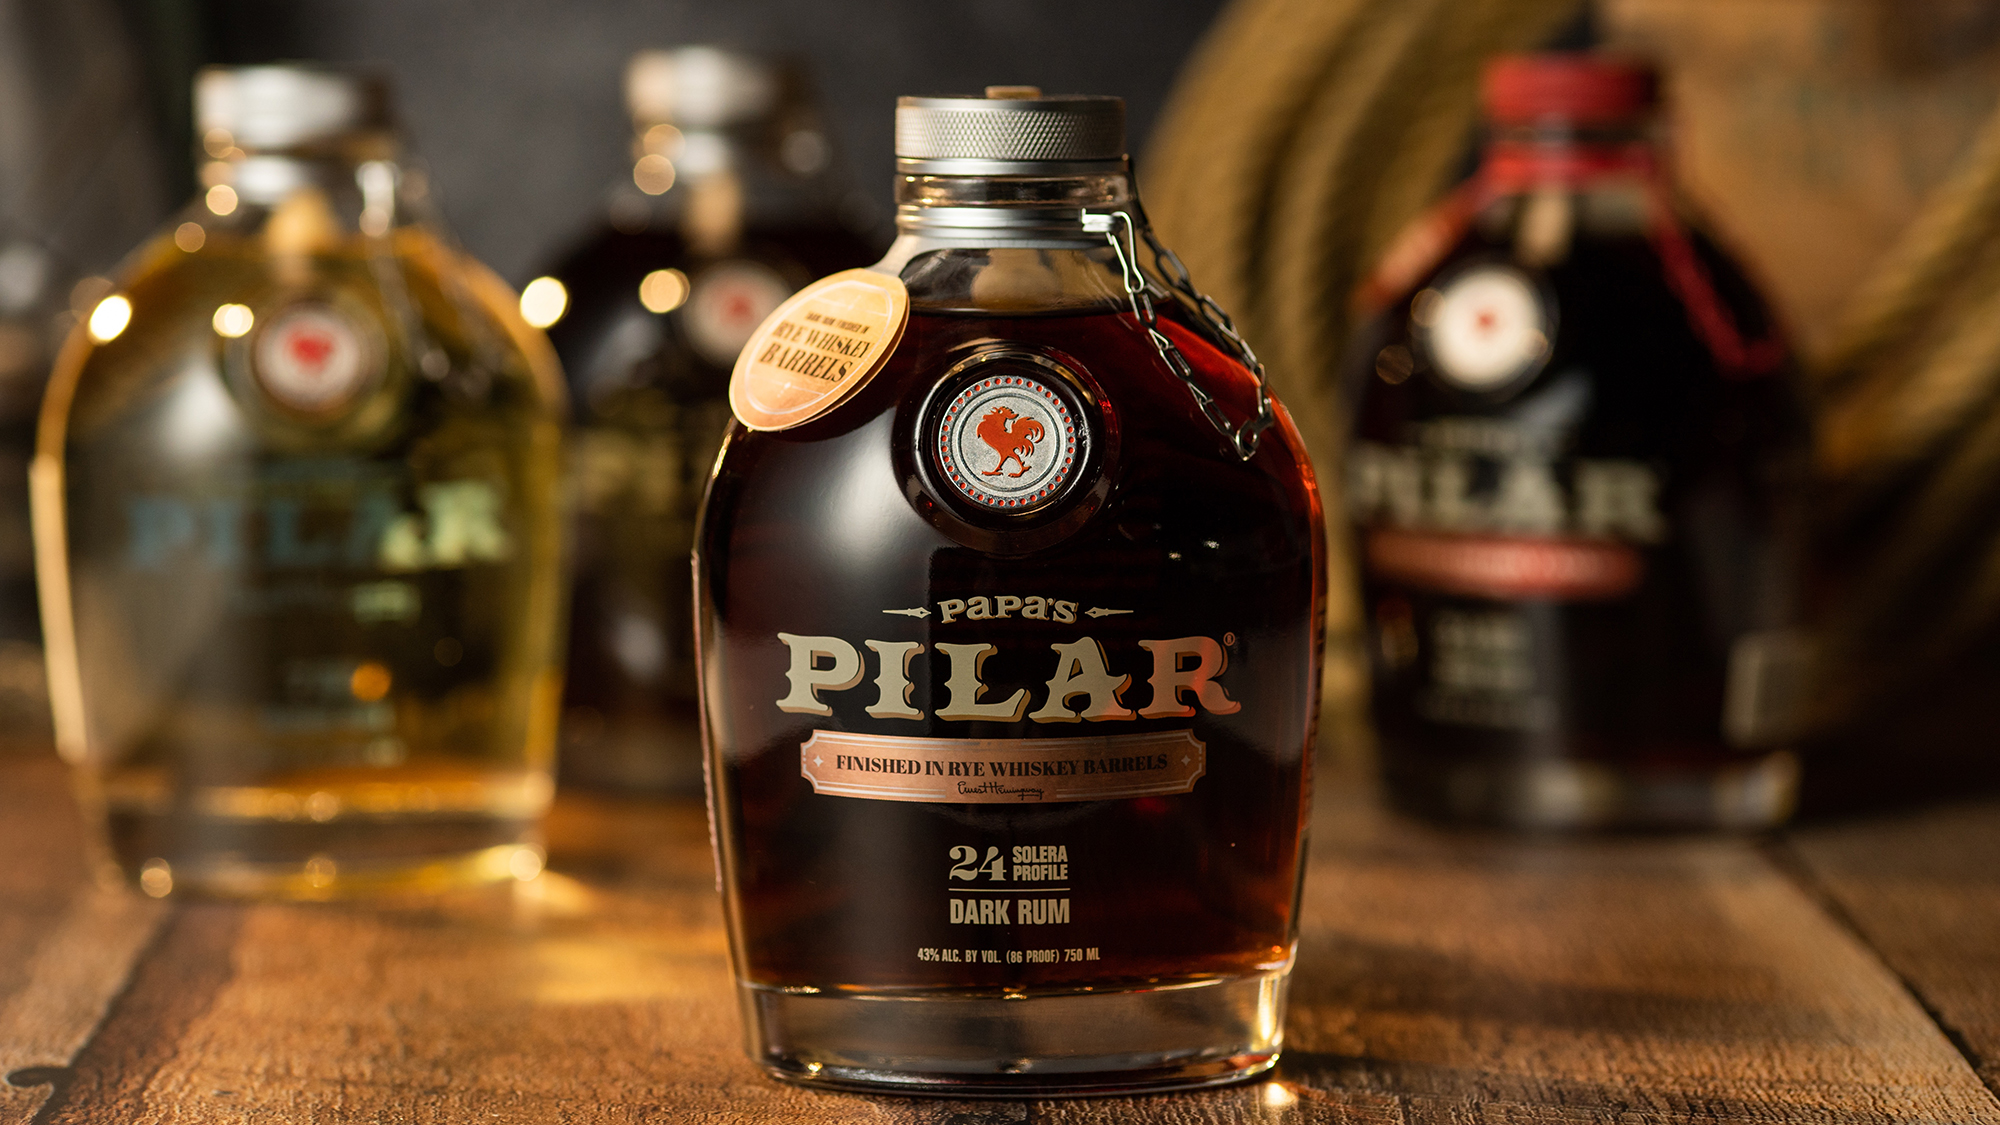 Hemingway-Inspired Rum Papa’s Pilar Launches Rye-Finished Expression